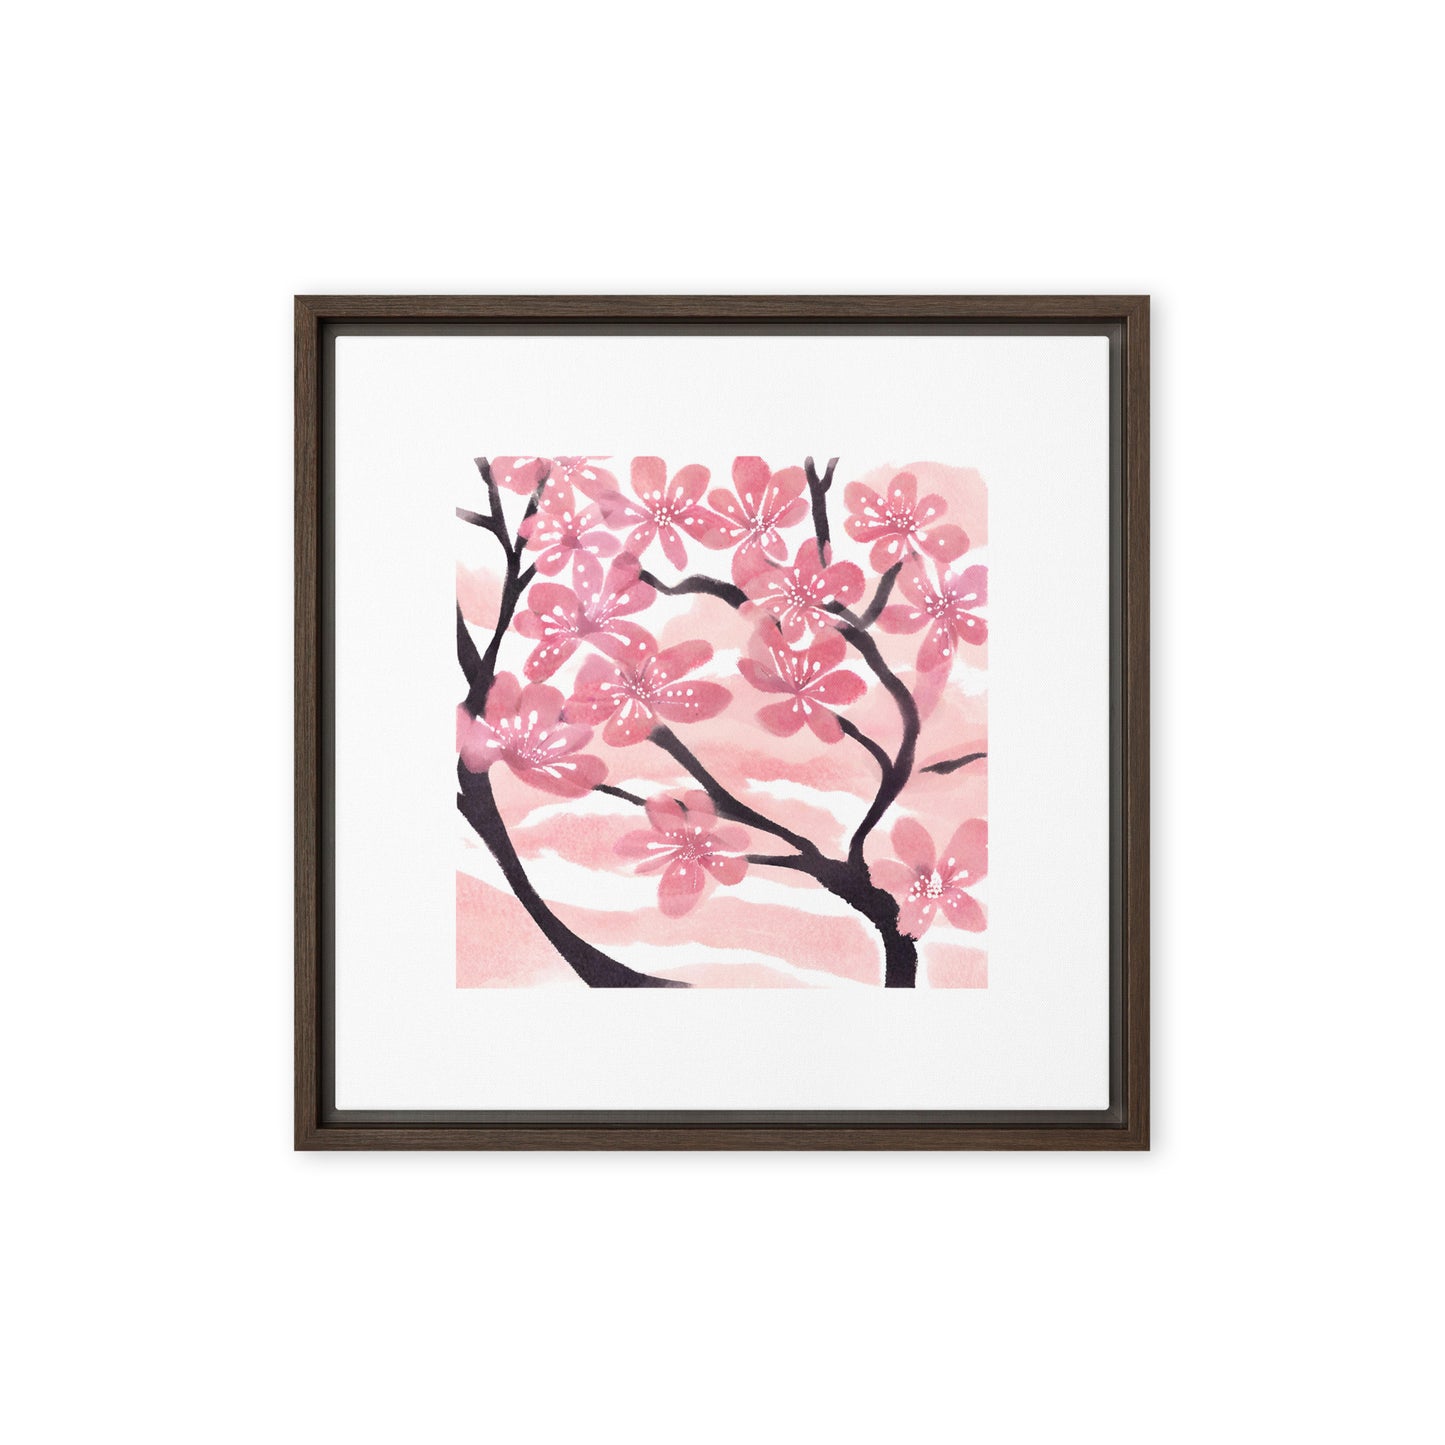 Cherry blossoms - Framed canvas